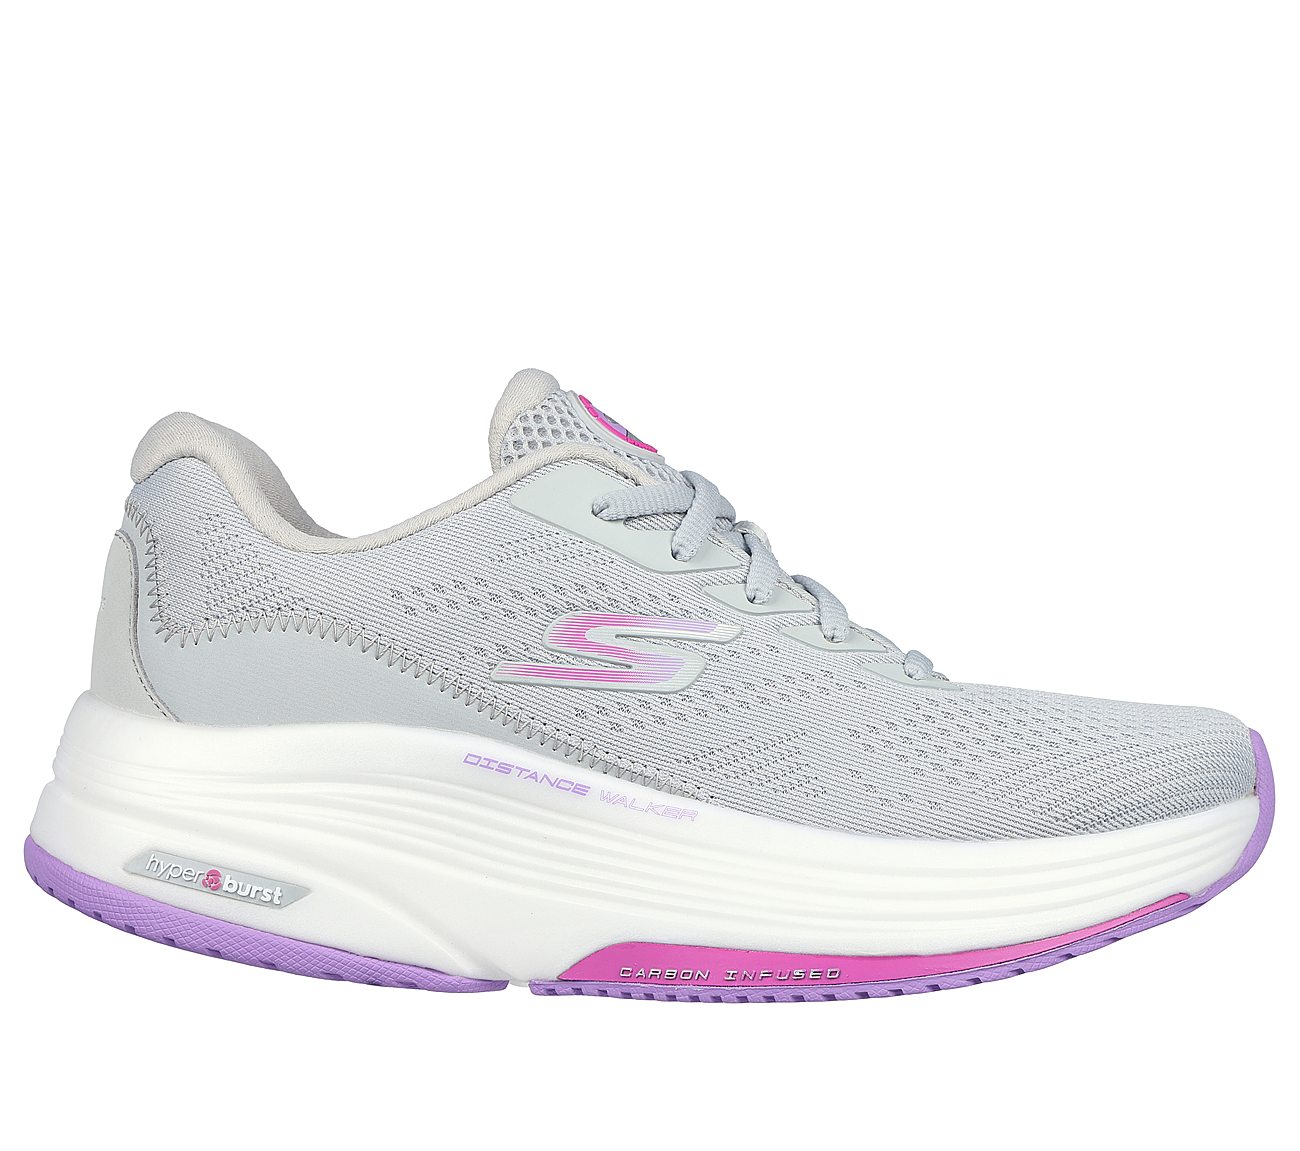 Skechers　Grey/Lavender　125129　Go　Shoes　Up　Walk-Distance-Walker　ID:　Womens　Lace　Style　India